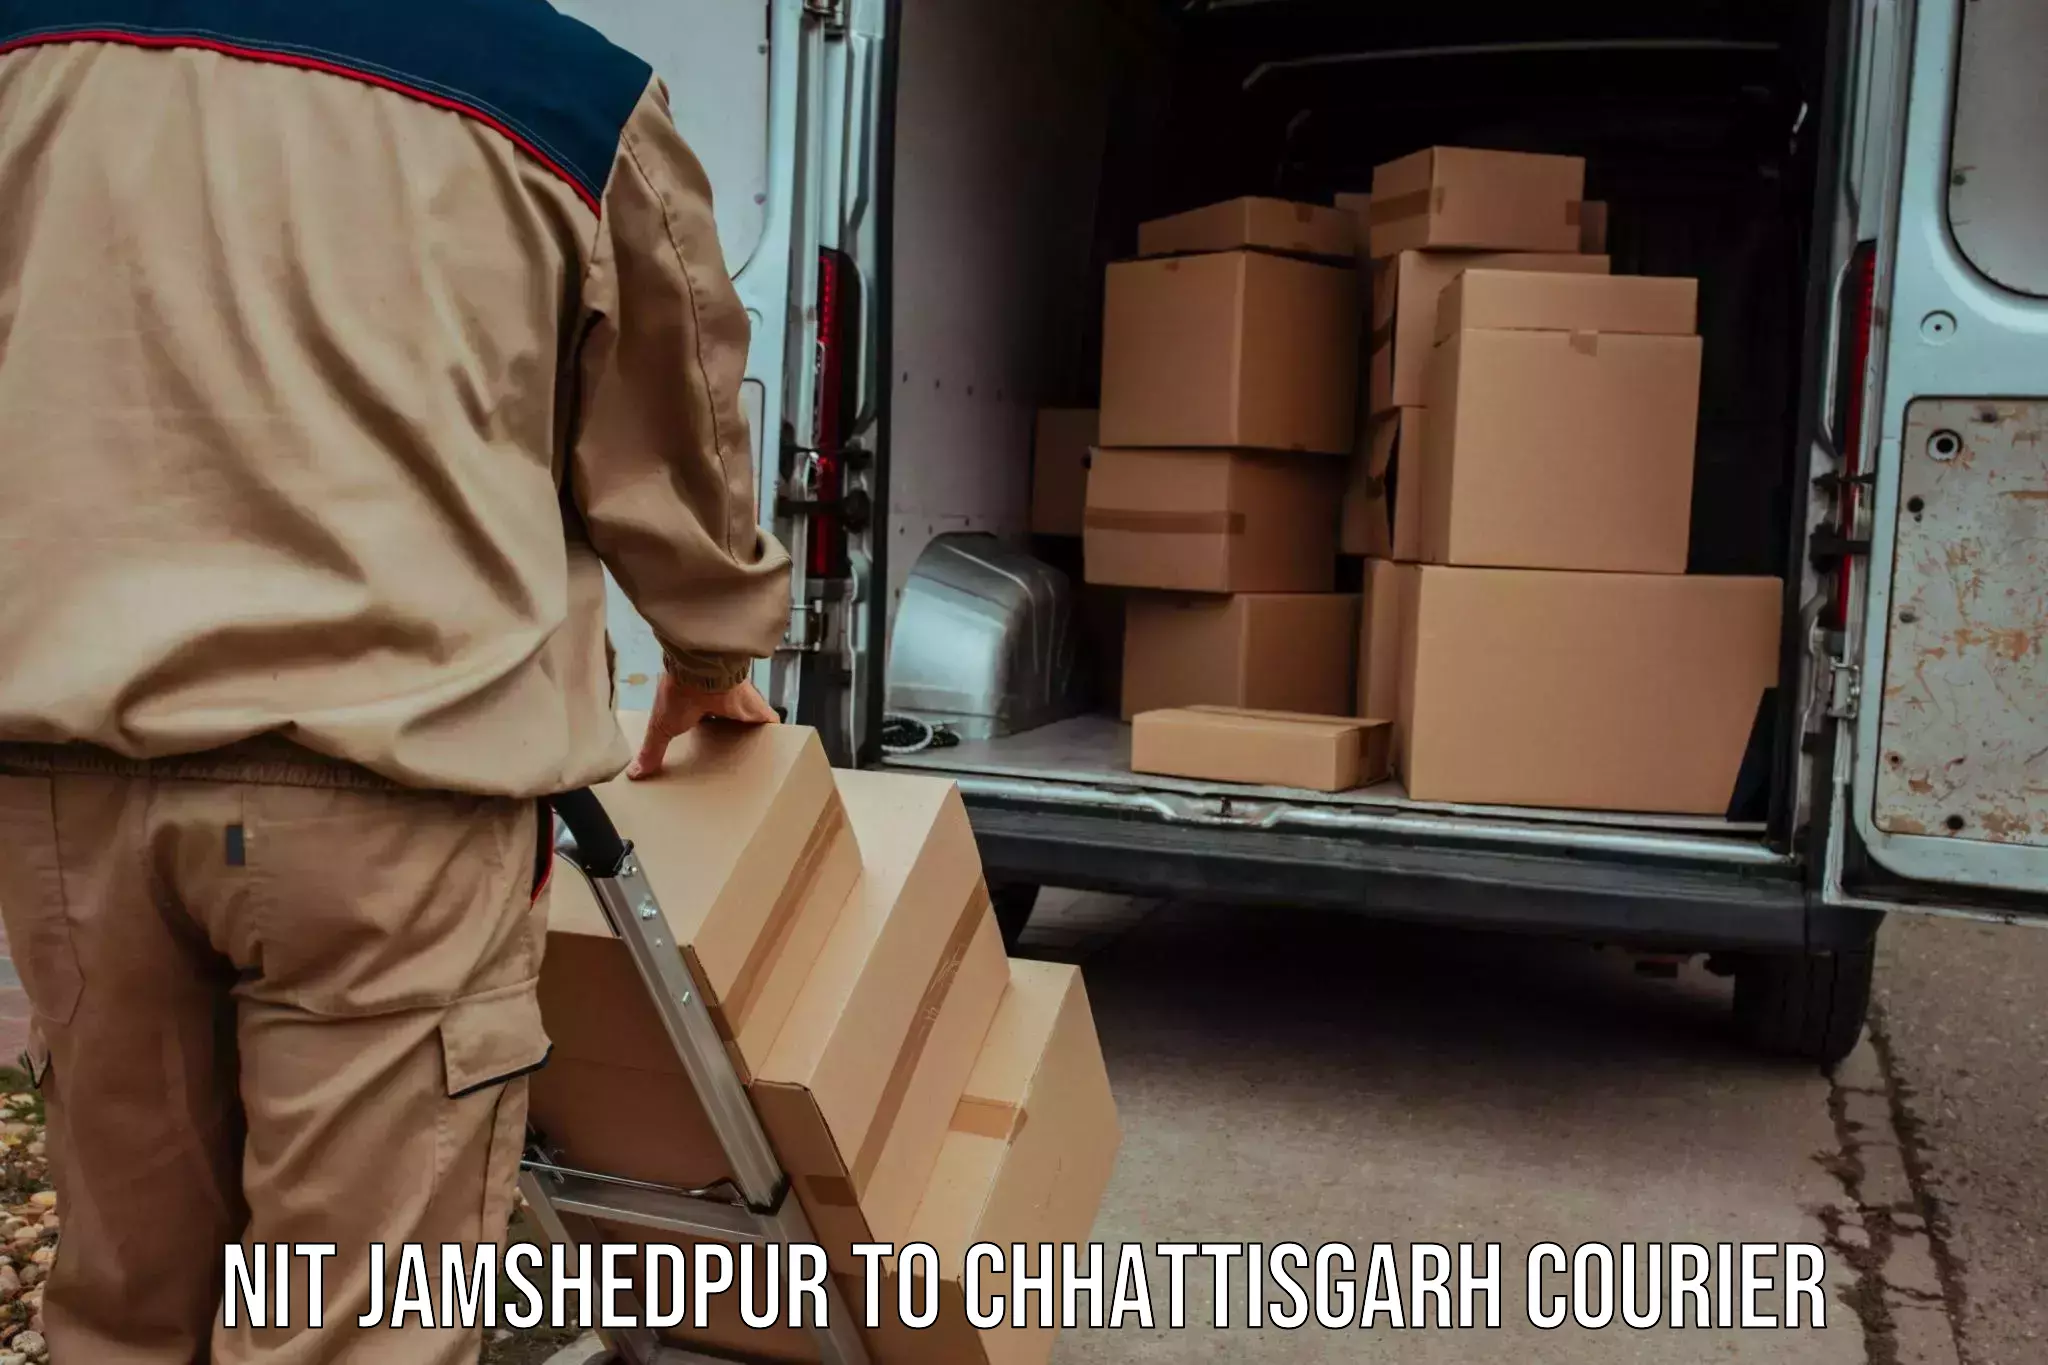 Multi-service courier options NIT Jamshedpur to Raigarh